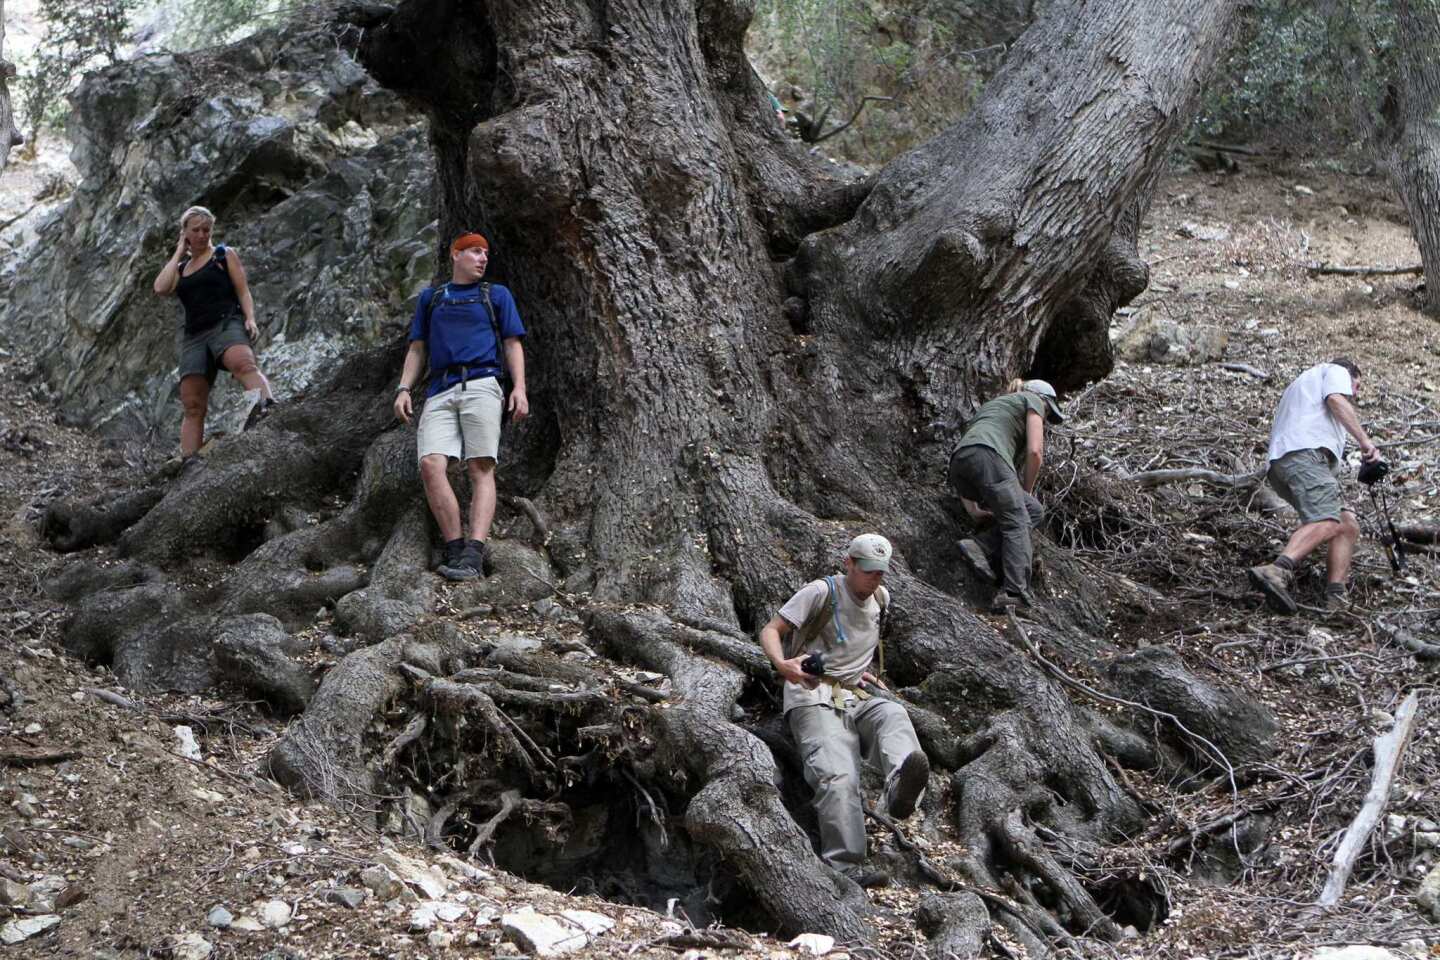 Wildlands Conservancy naturalists and volunteers climb on a canyon live oak tree located in a meadow surrounded by steep slopes in the Oak Glen area of the San Bernardino Mountains. The tree was confirmed to be the largest oak in North America.